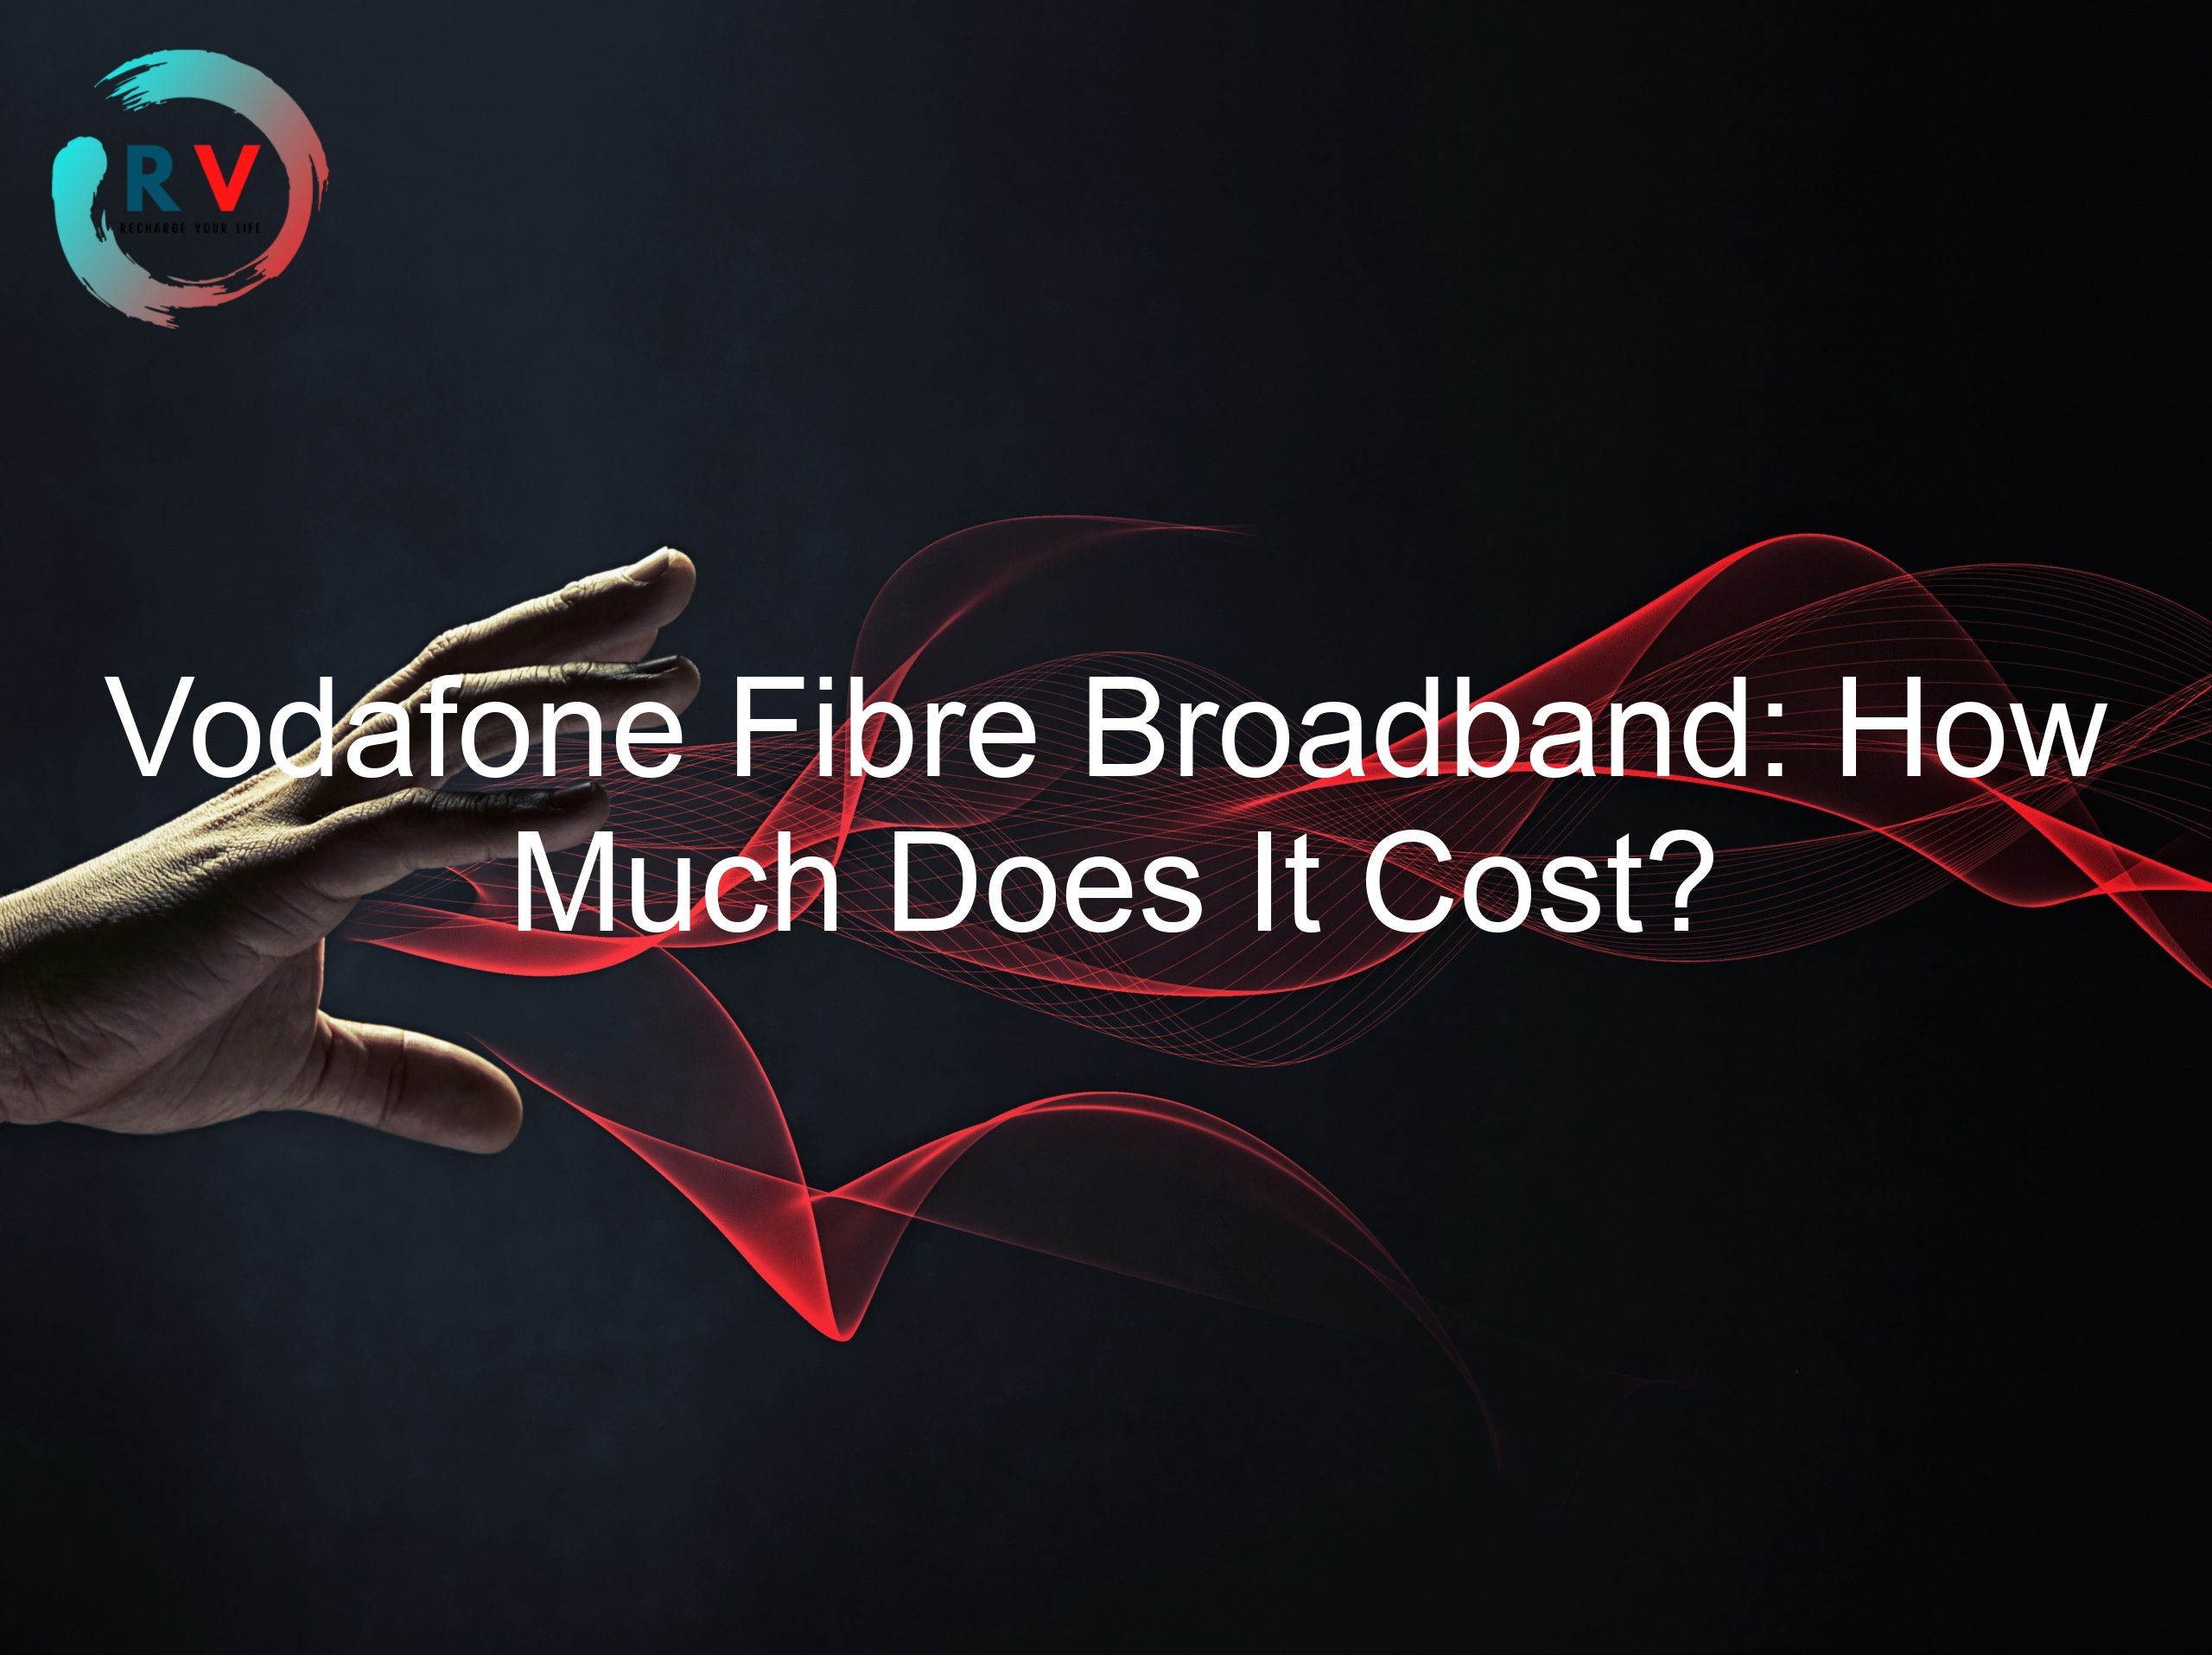 Vodafone Fibre Broadband: How Much Does It Cost?